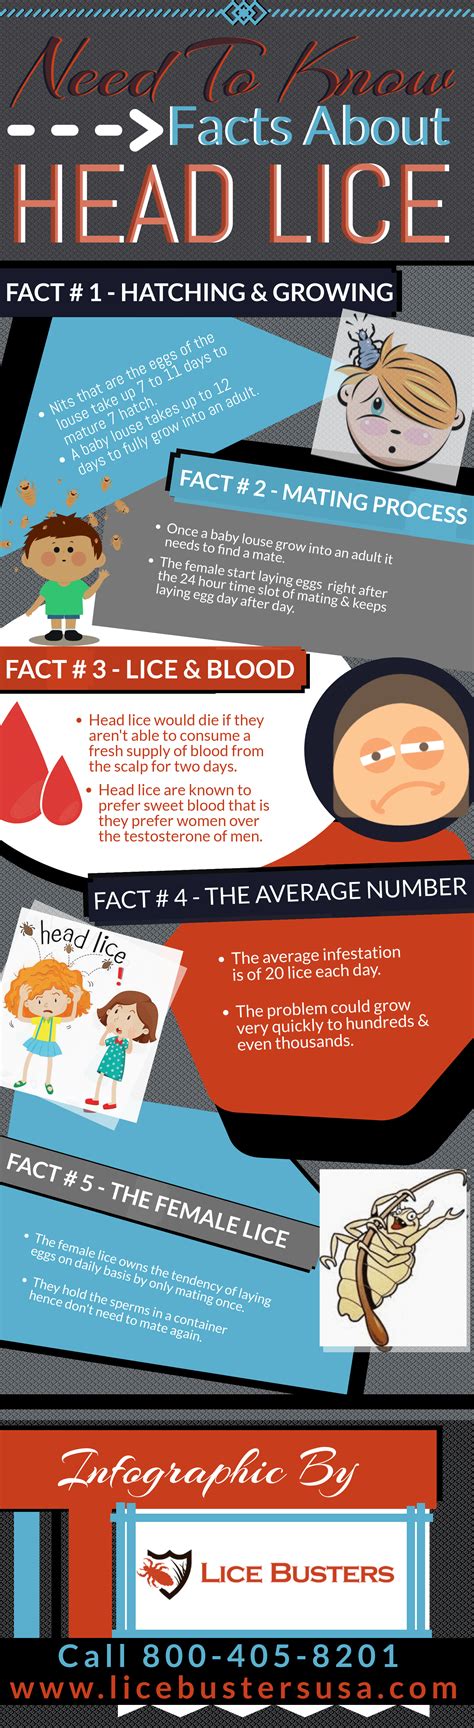 Facts Need To Know About Head Lice Infographic Lice Busters Usa